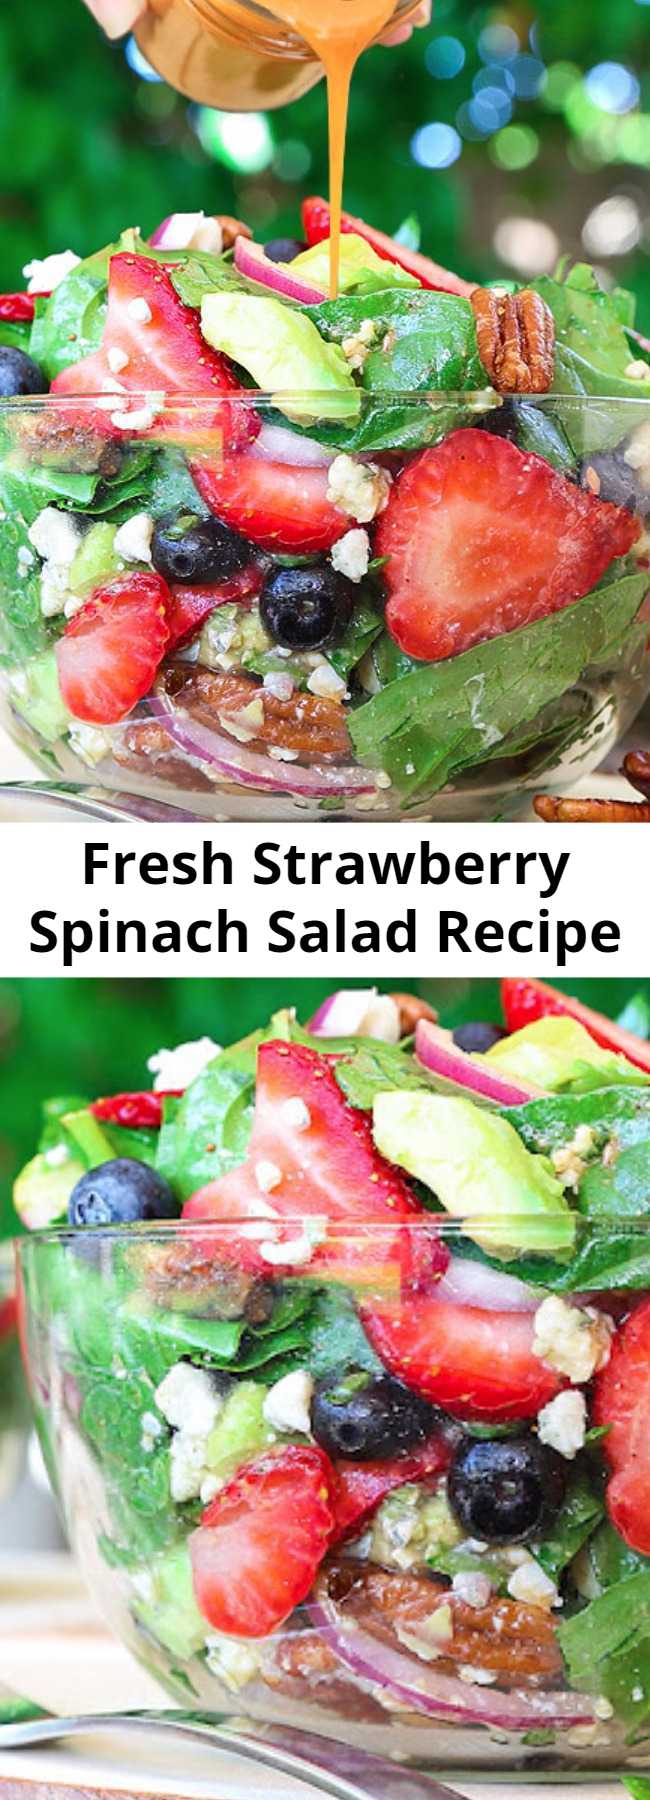 Fresh Strawberry Spinach Salad Recipe - Best Ever Strawberry Spinach Salad will rock your world! This simple recipe is a celebration of summers bounty in the most spectacular salad you will ever eat. Fresh crisp spinach salad is taken to another level with bursts of sweetness from fresh summer fruit and buttery avocado. It is tossed in a sweet and tangy vinaigrette and topped with crunchy nuts and creamy cheese. #salad #strawberry